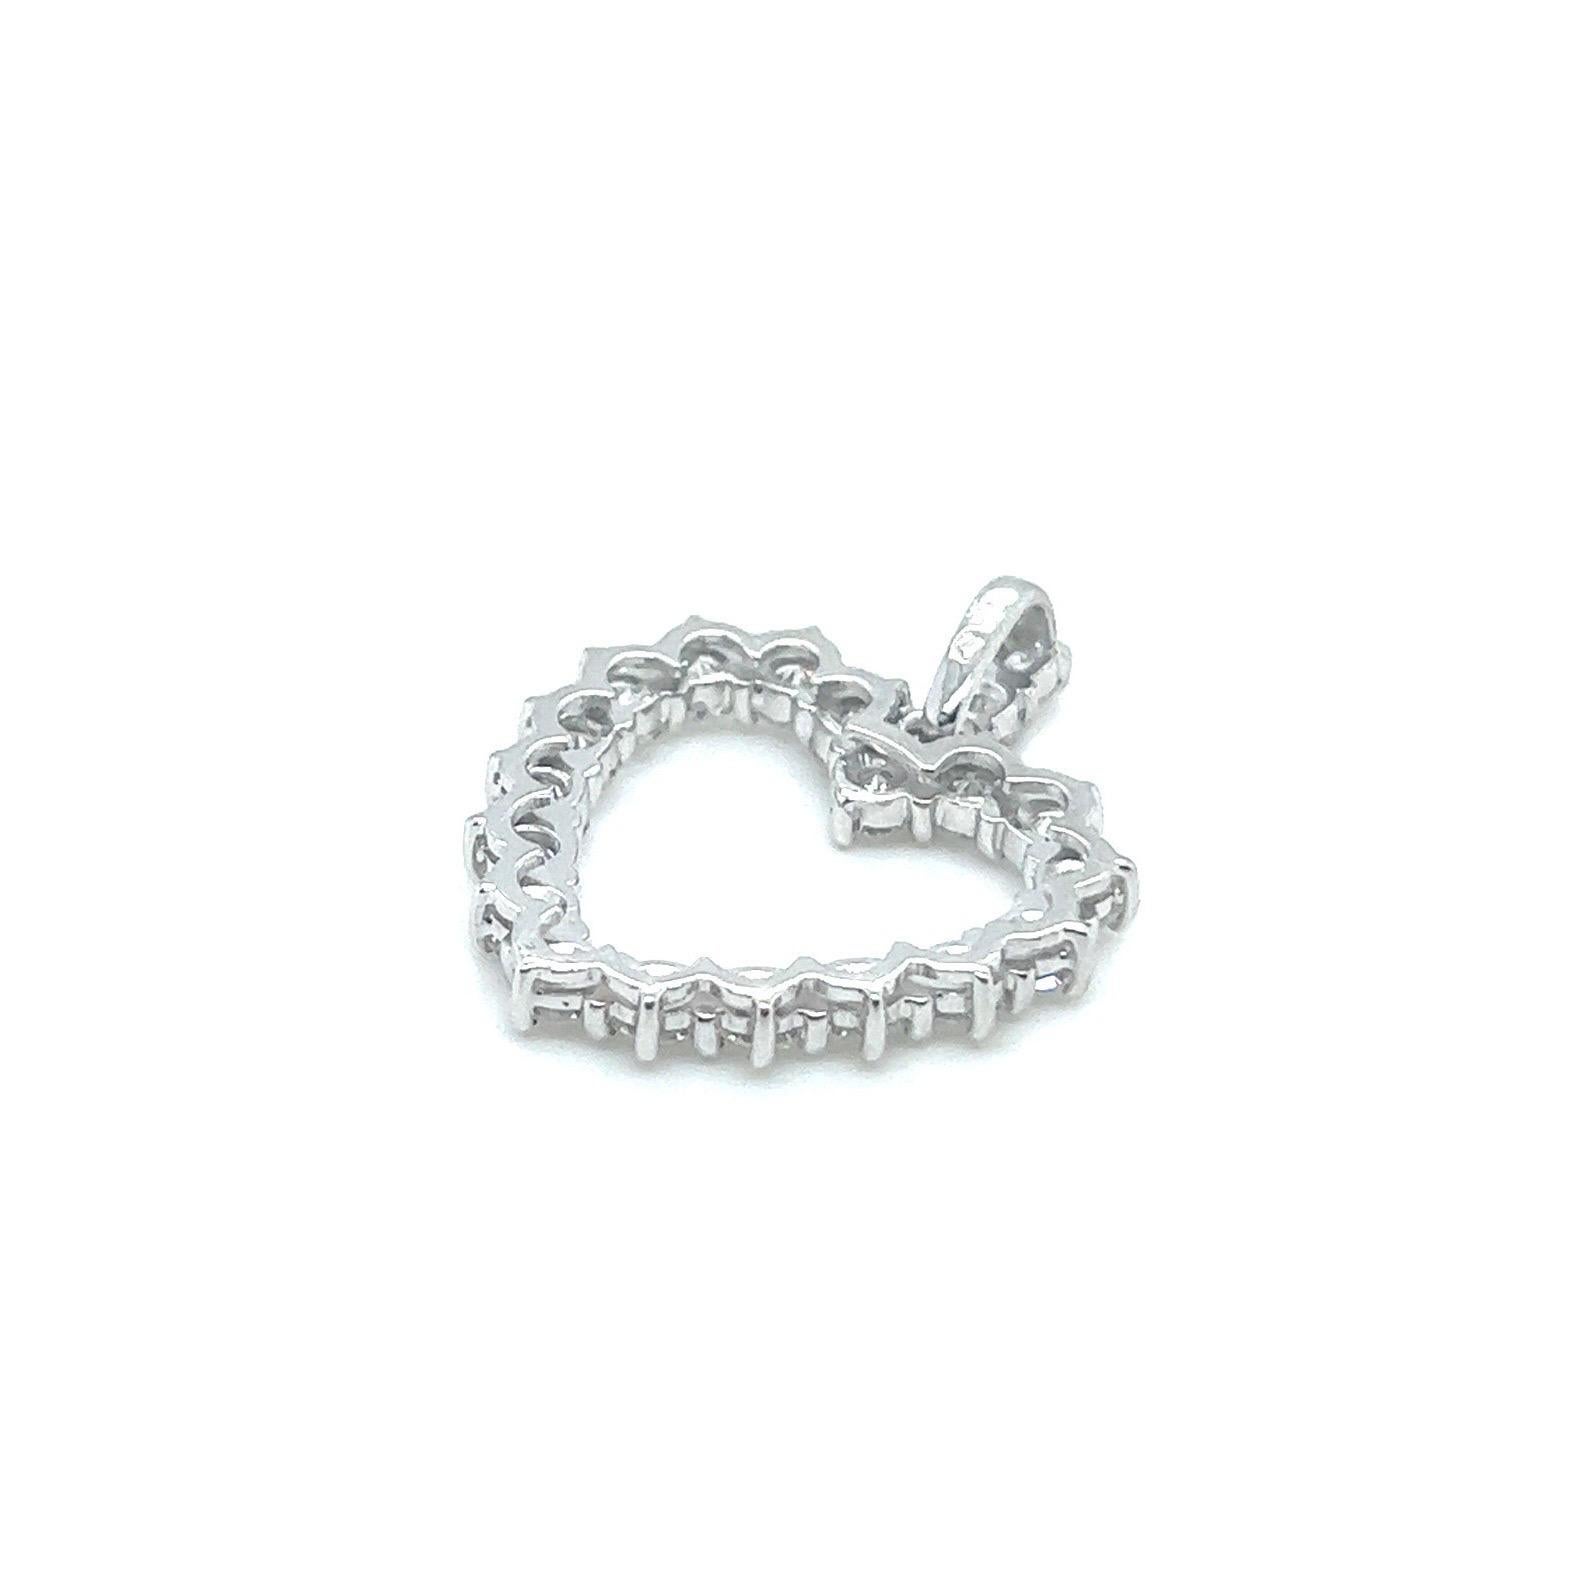 Ravishing 18 karat white gold and 2 carat diamonds heart-shaped pendant.

Crafted in 18 karat white gold, this sparkling heart-shaped pendant is decorated with 18 brilliant-cut diamonds and the bail additionally accented with 3 brilliant-cut